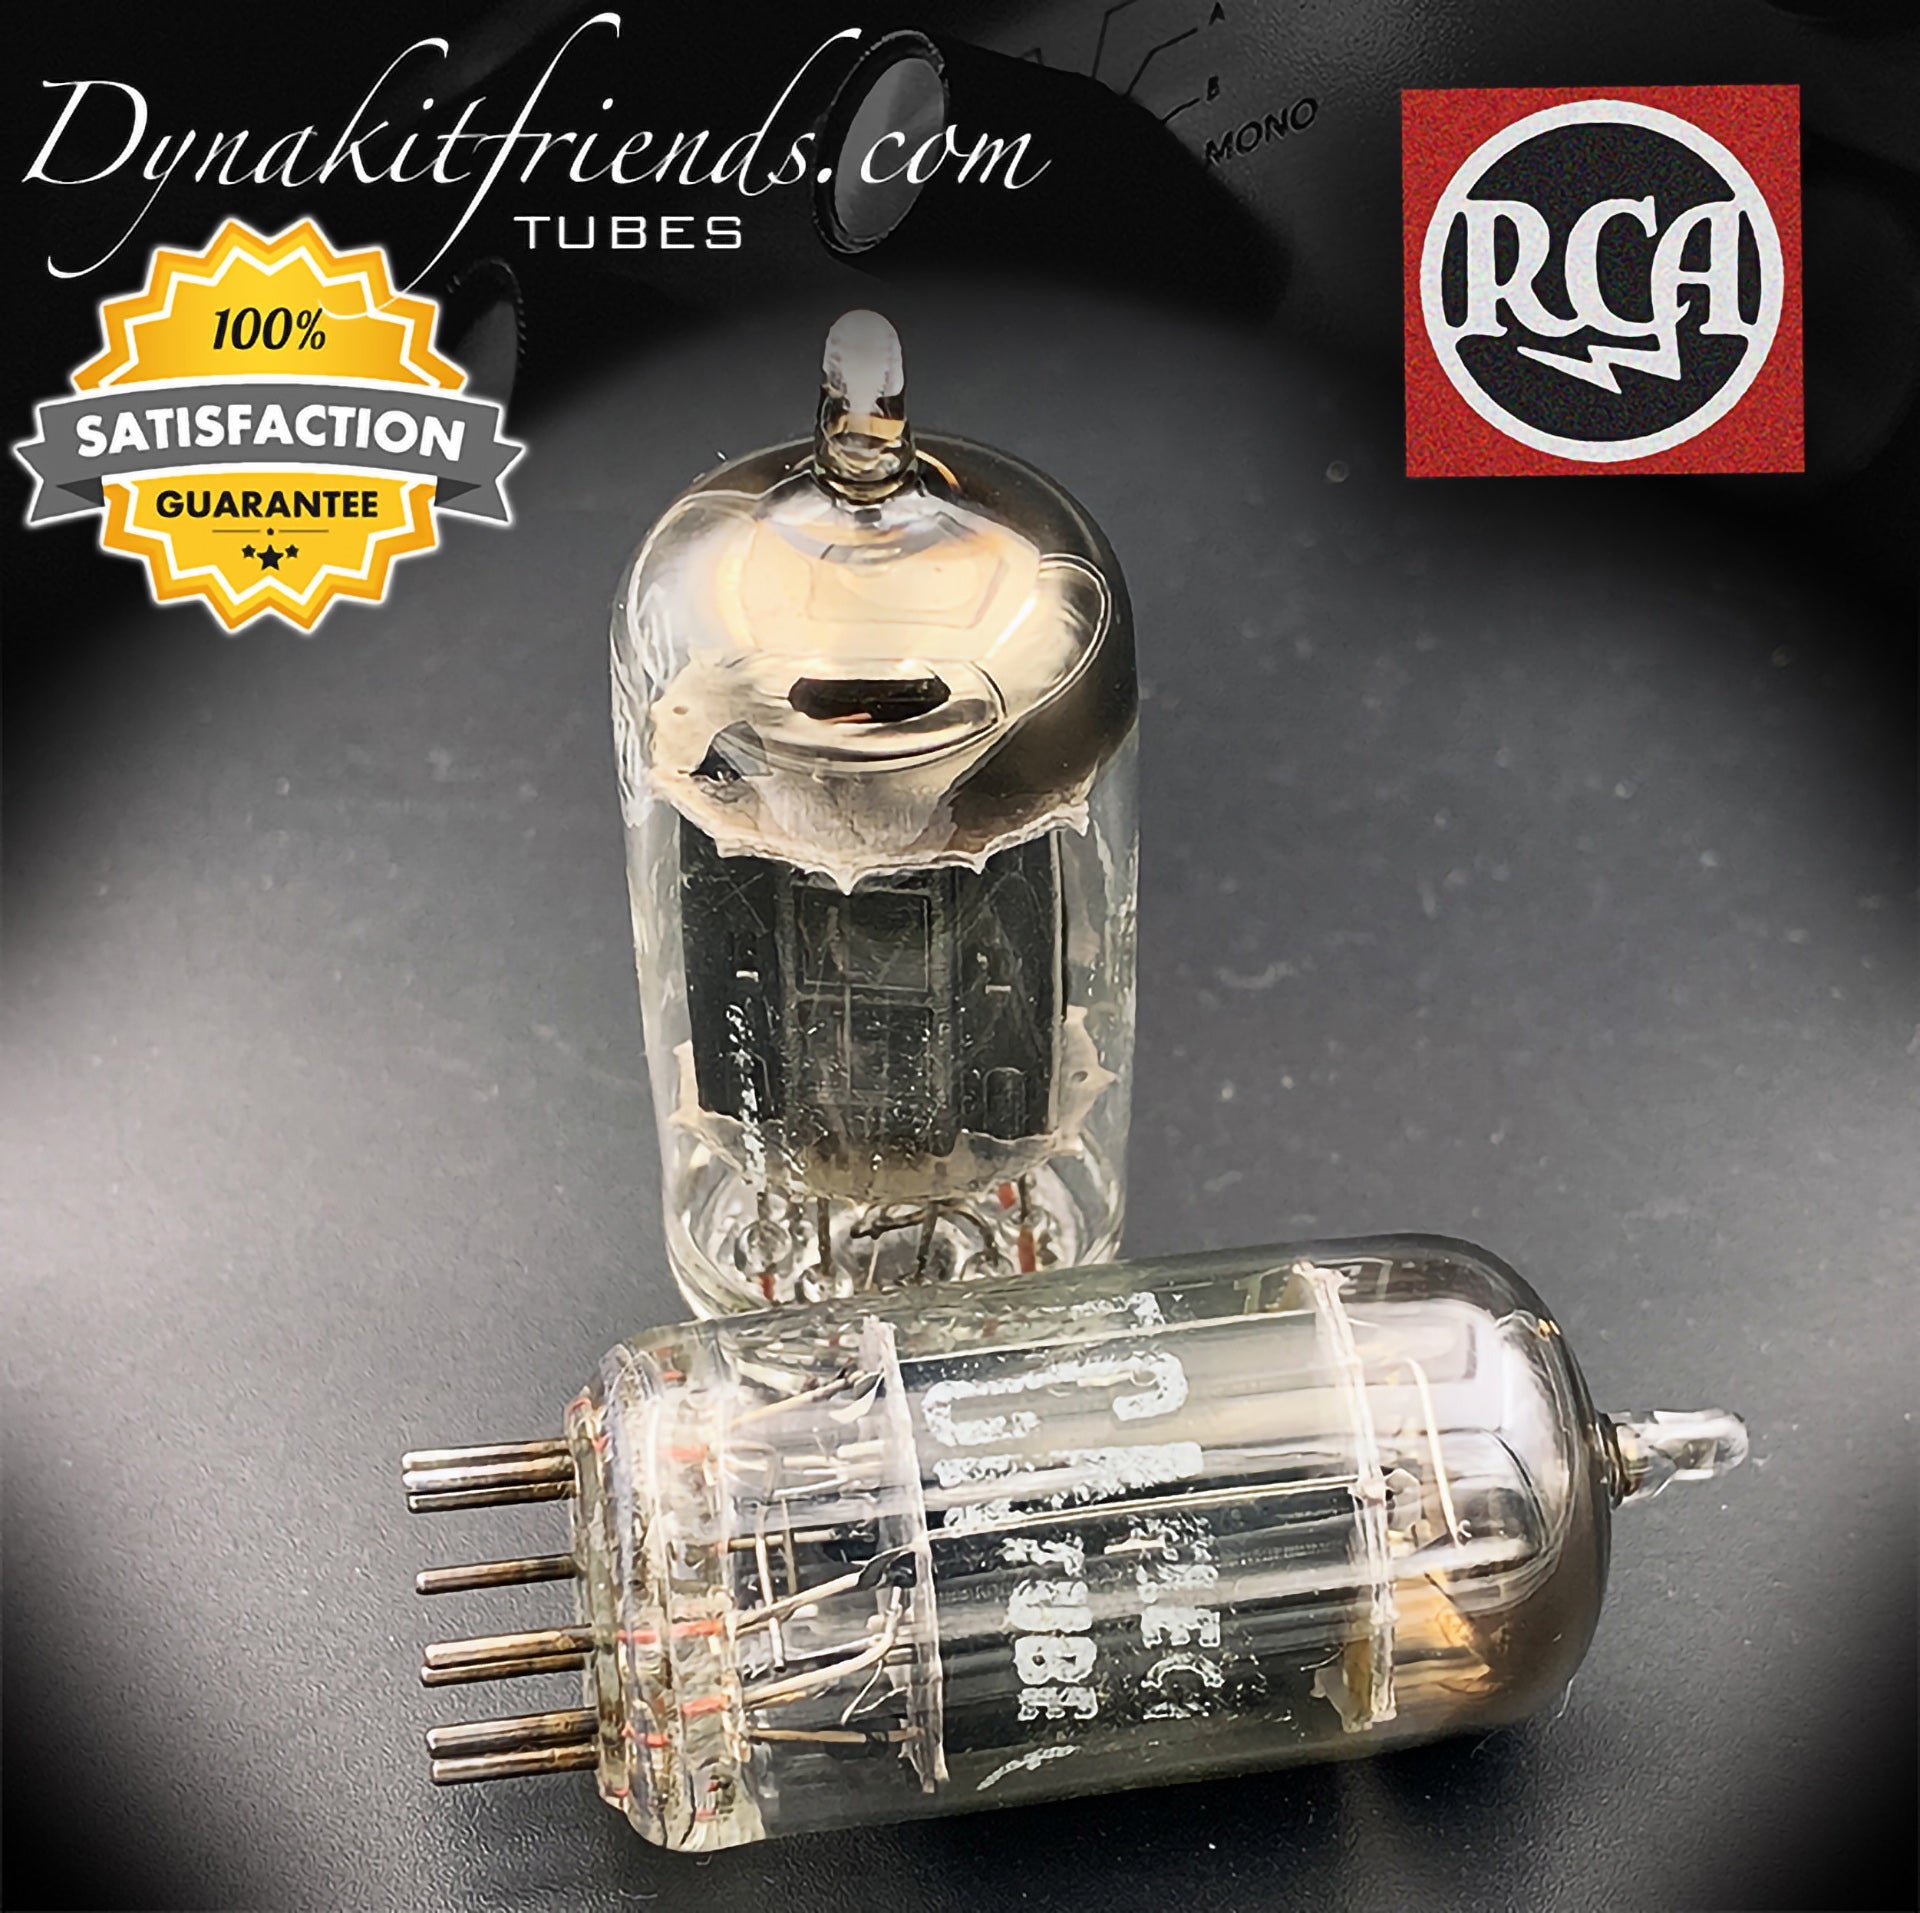 12AX7 ( ECC83 ) RCA Long Black Plates [] Tilted Getter Matched Tubes MADE IN USA '57 - Vacuum Tubes Treasures